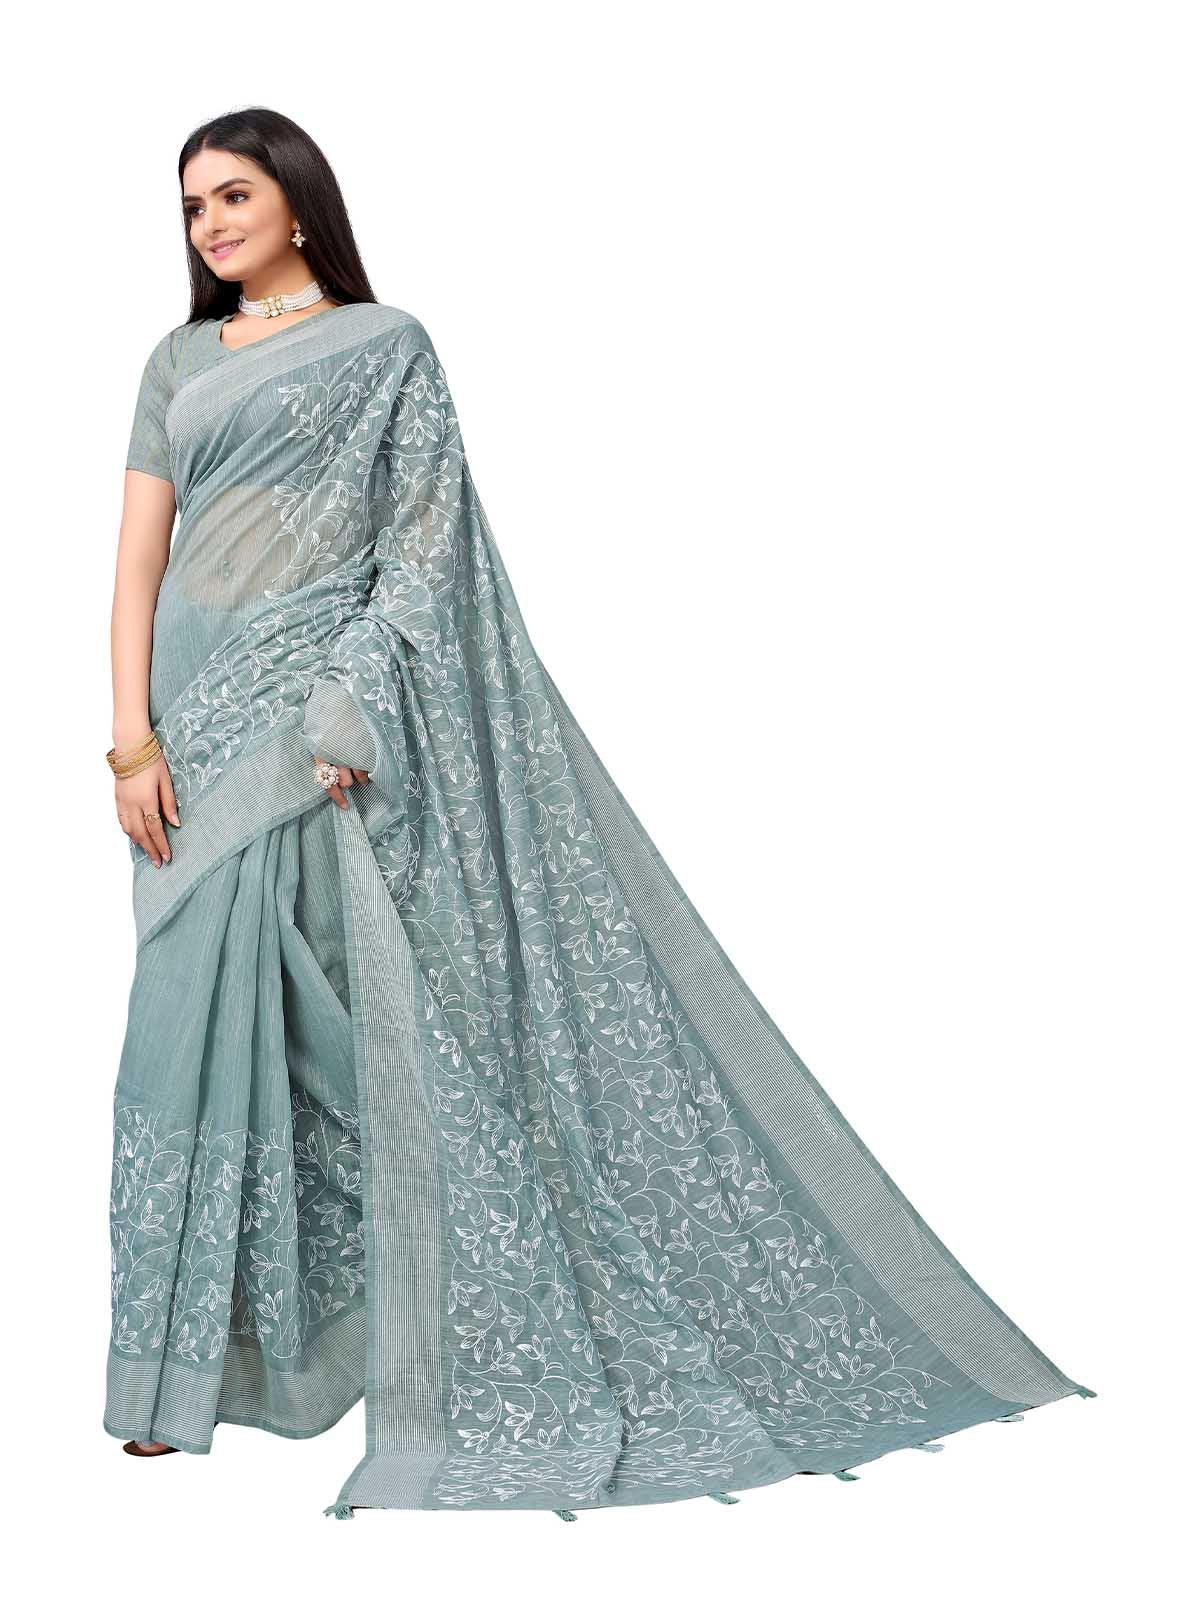 Women's Blue Pure Cotton Embroidered Saree With Blouse - Odette